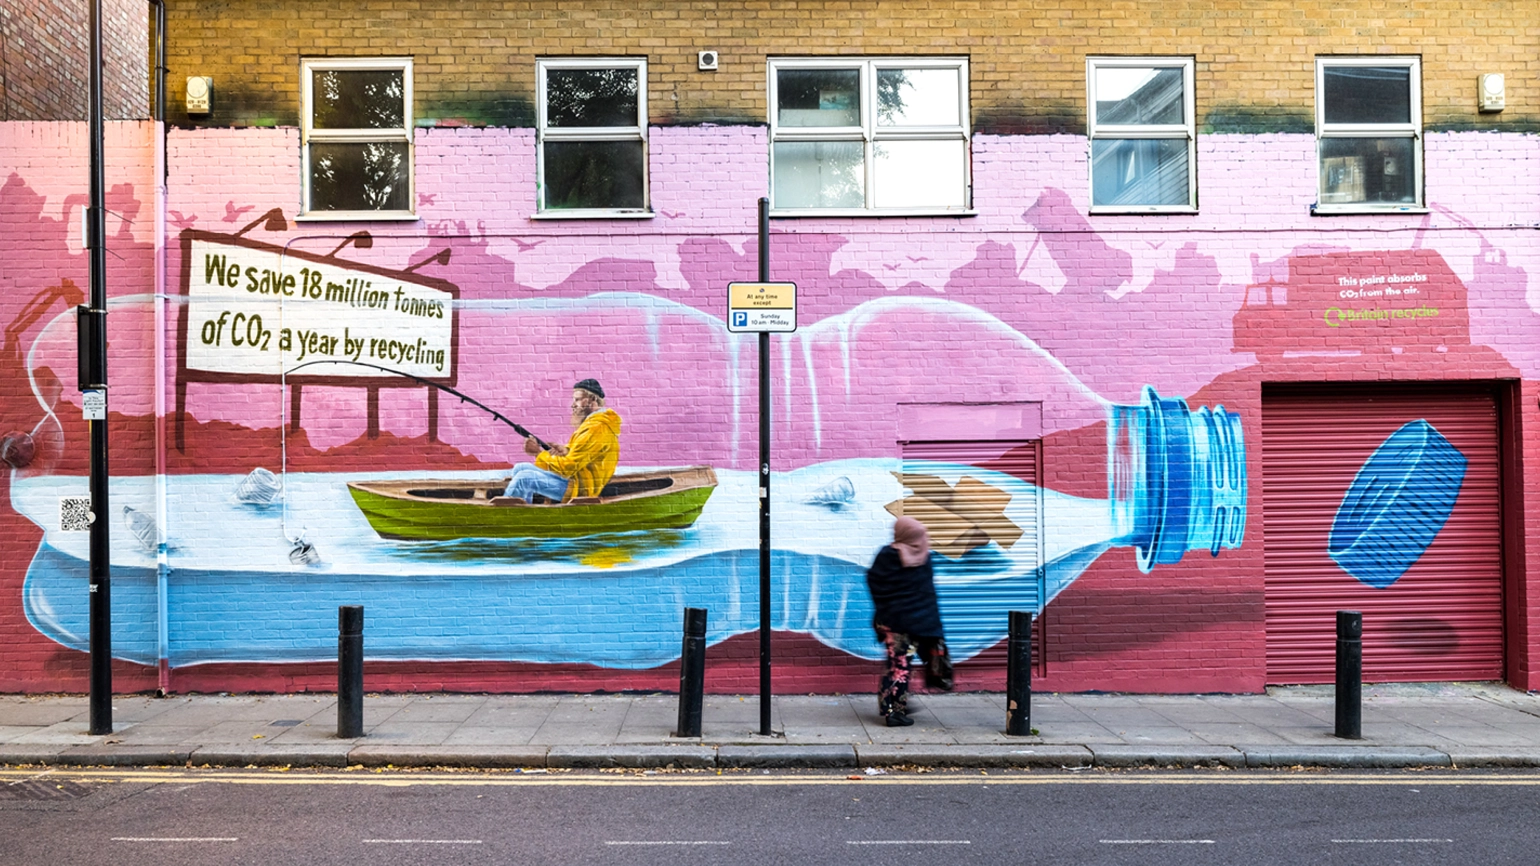 A face-fronted view of the graffiti of a man goes fishing inside a plastic bottle 